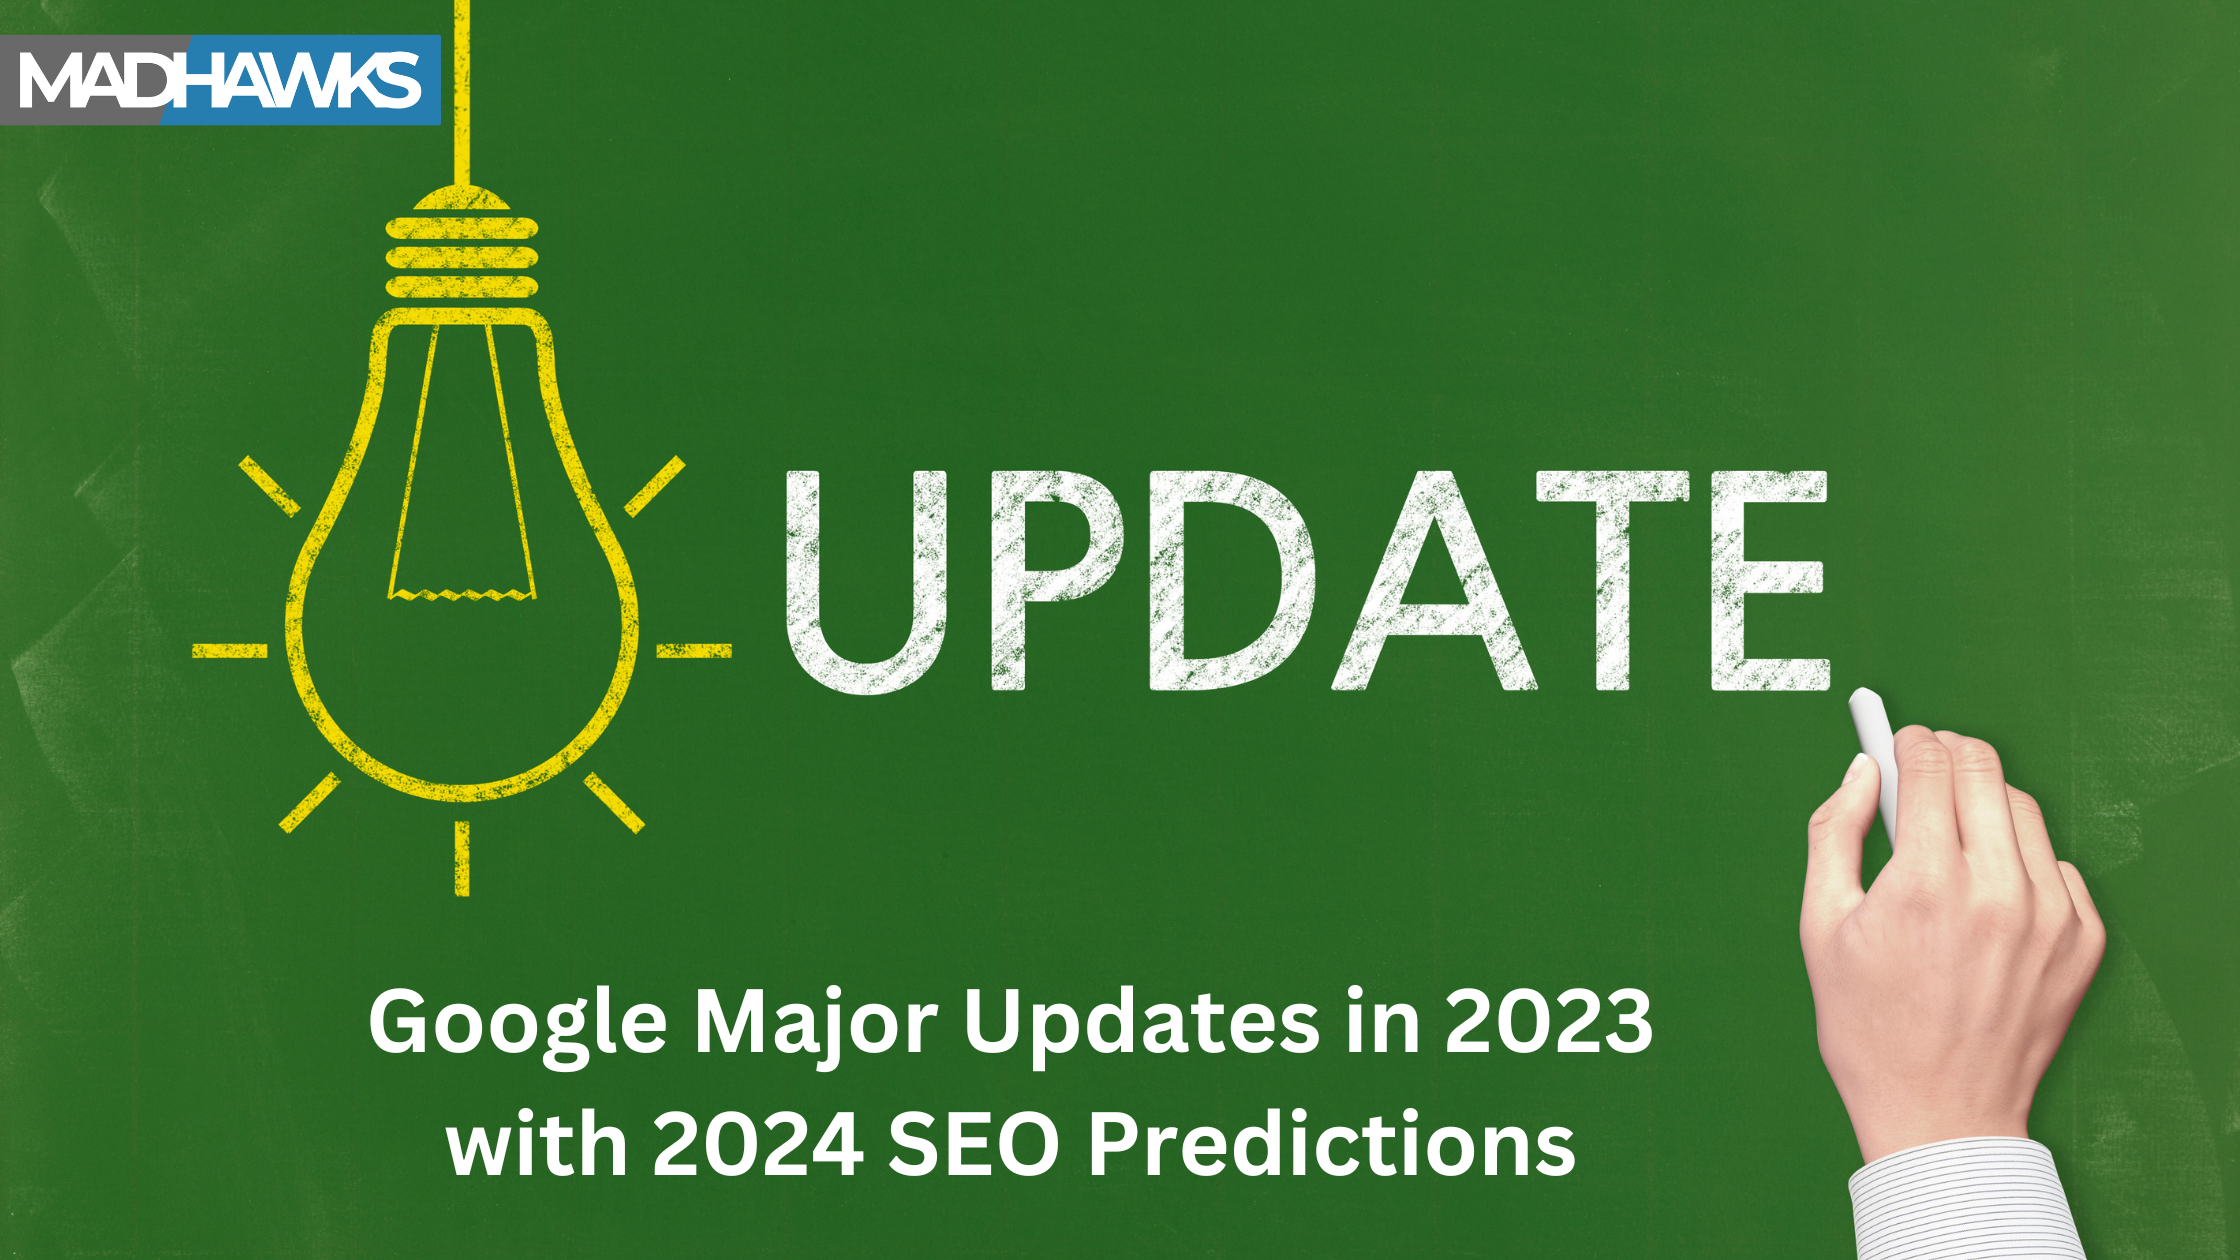 Google Major Updates in 2023 with 2024 SEO Predictions